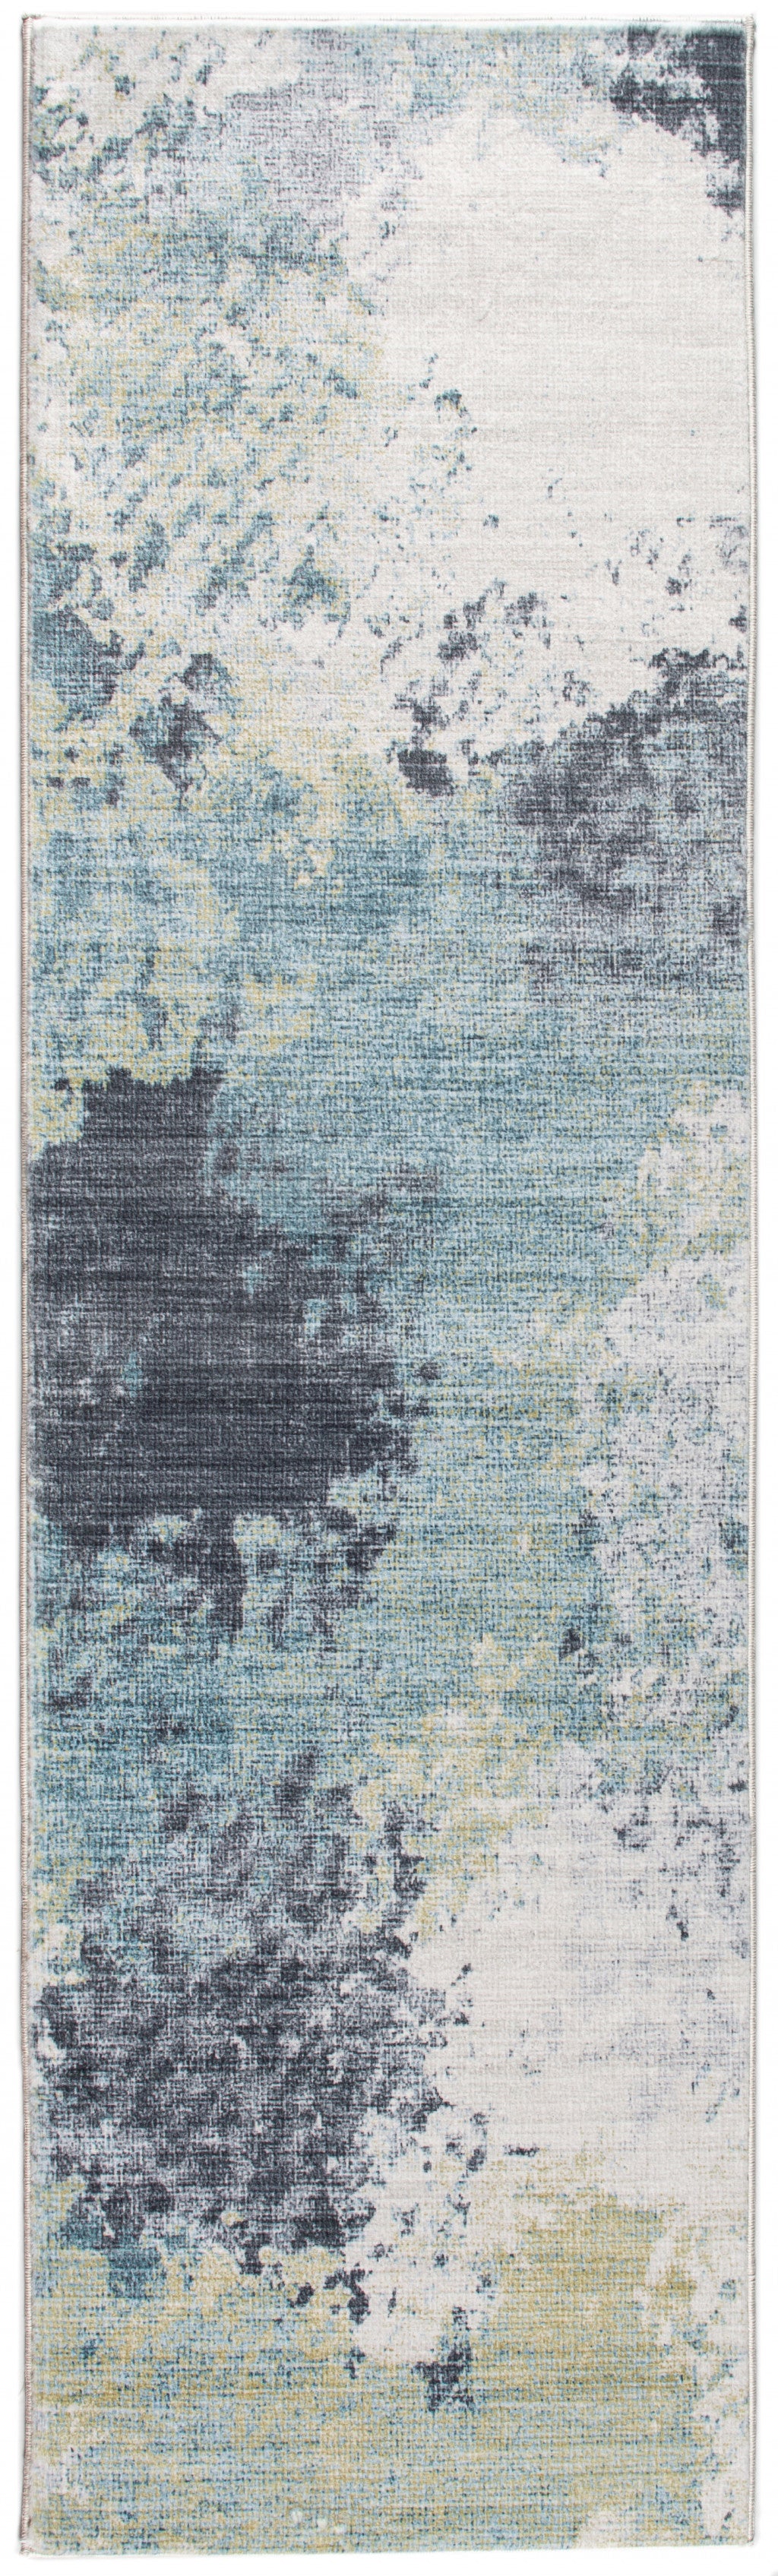 8' x 10' Blue and Ivory Abstract Area Rug